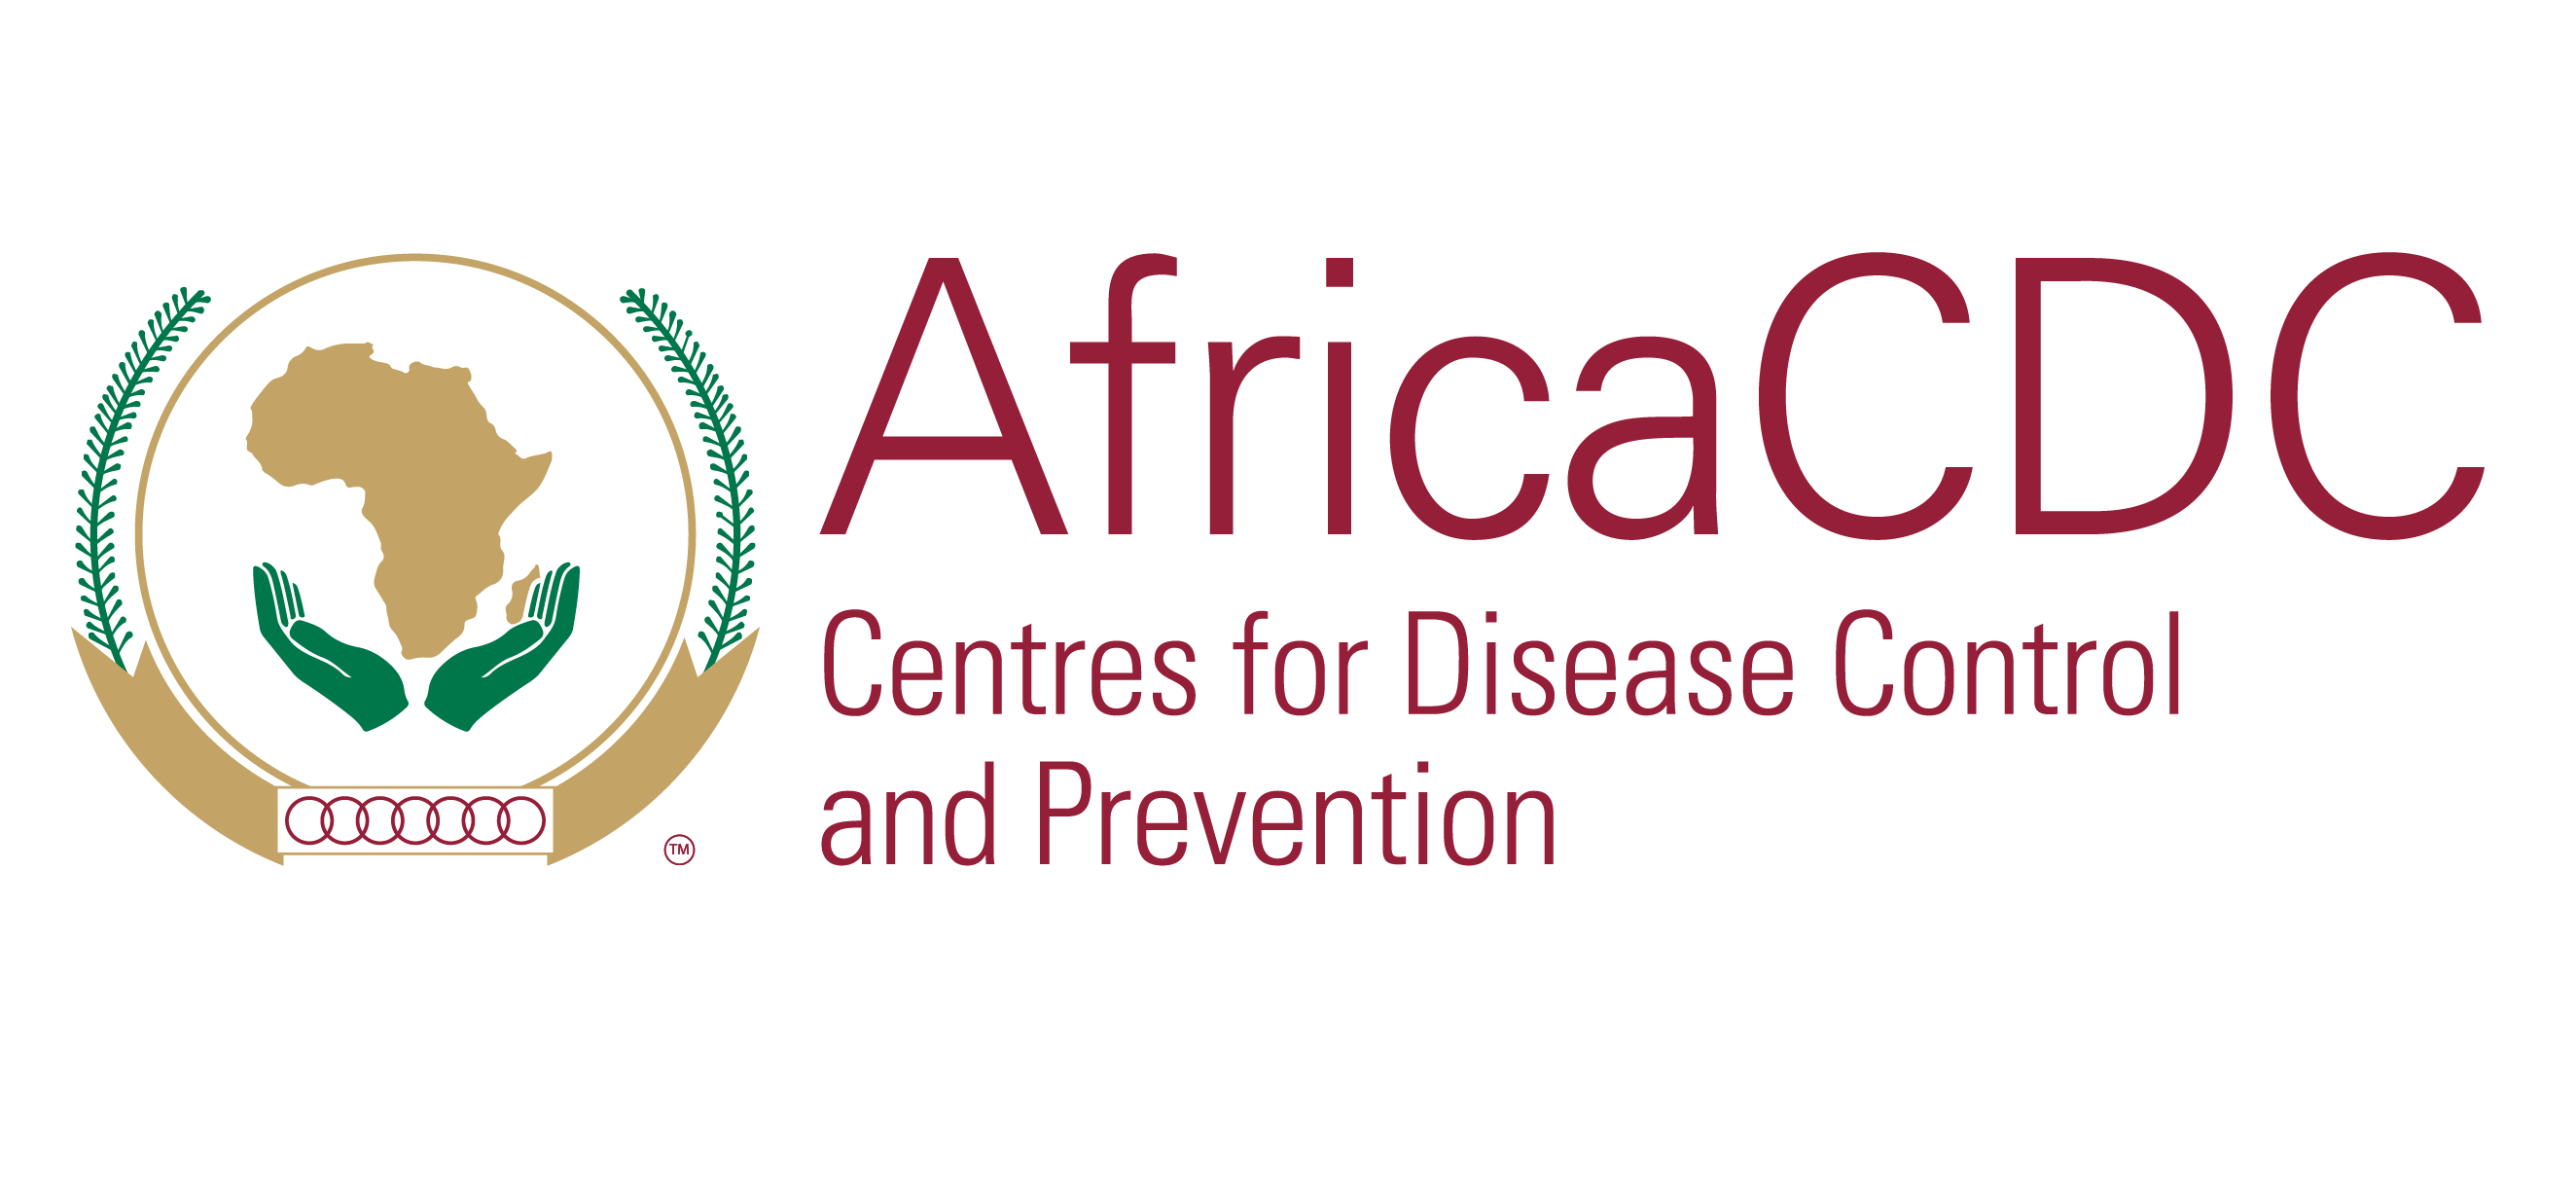 African Union - Centre for Disease Control and Prevention - Safeguarding Africa's Health